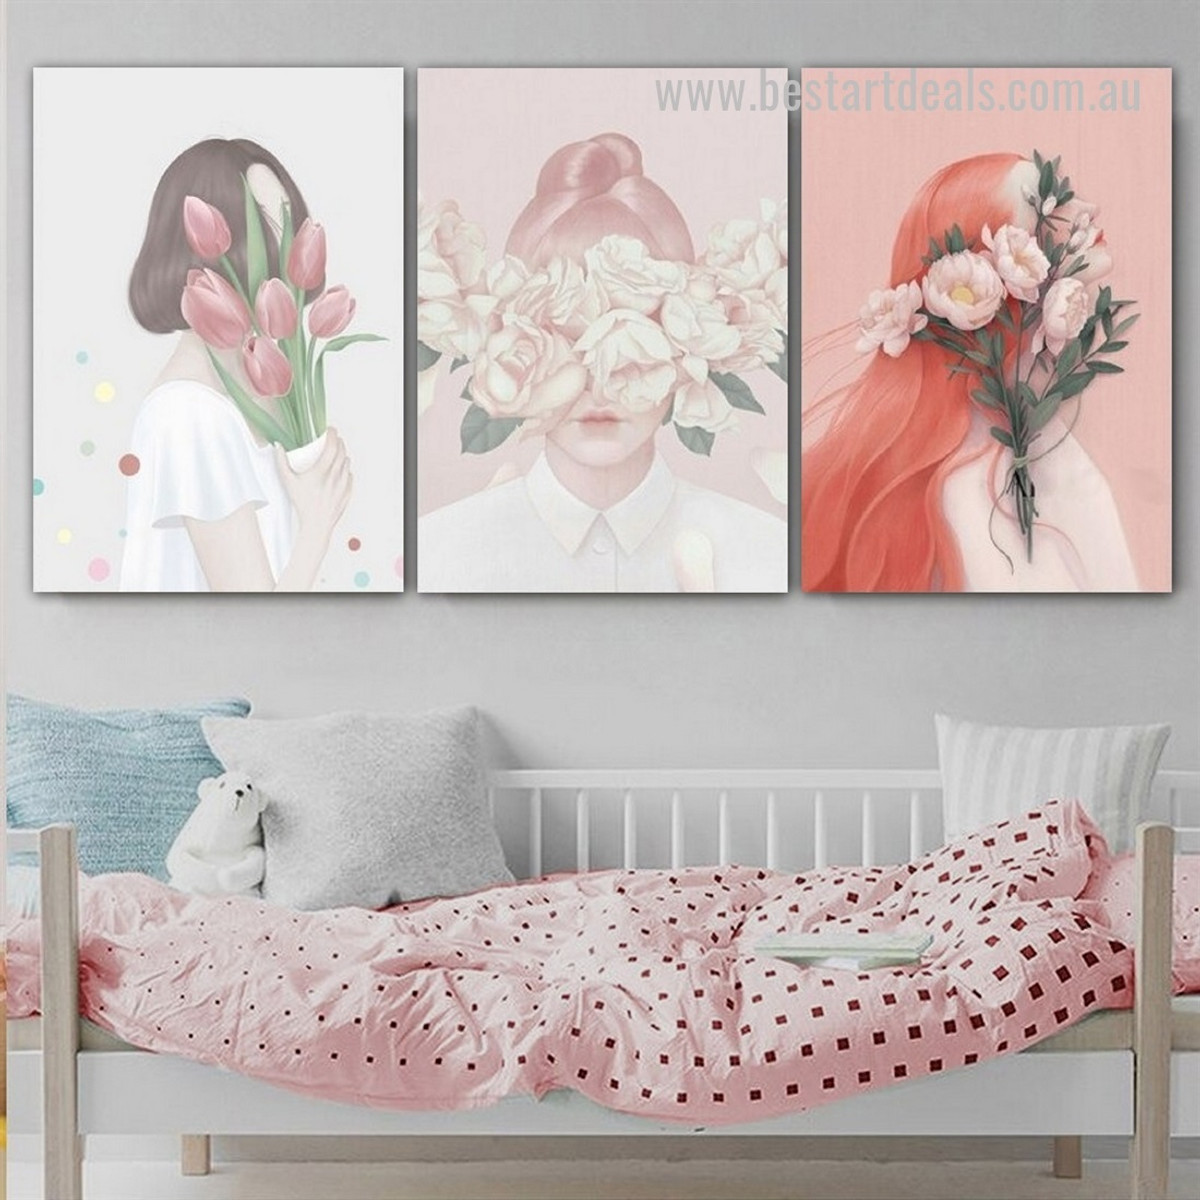 Juvenilia Daffodils Face Girls Nordic Canvas Wall Art 3 Piece Framed Stretched Figure Floral Print Image for Home Outfit